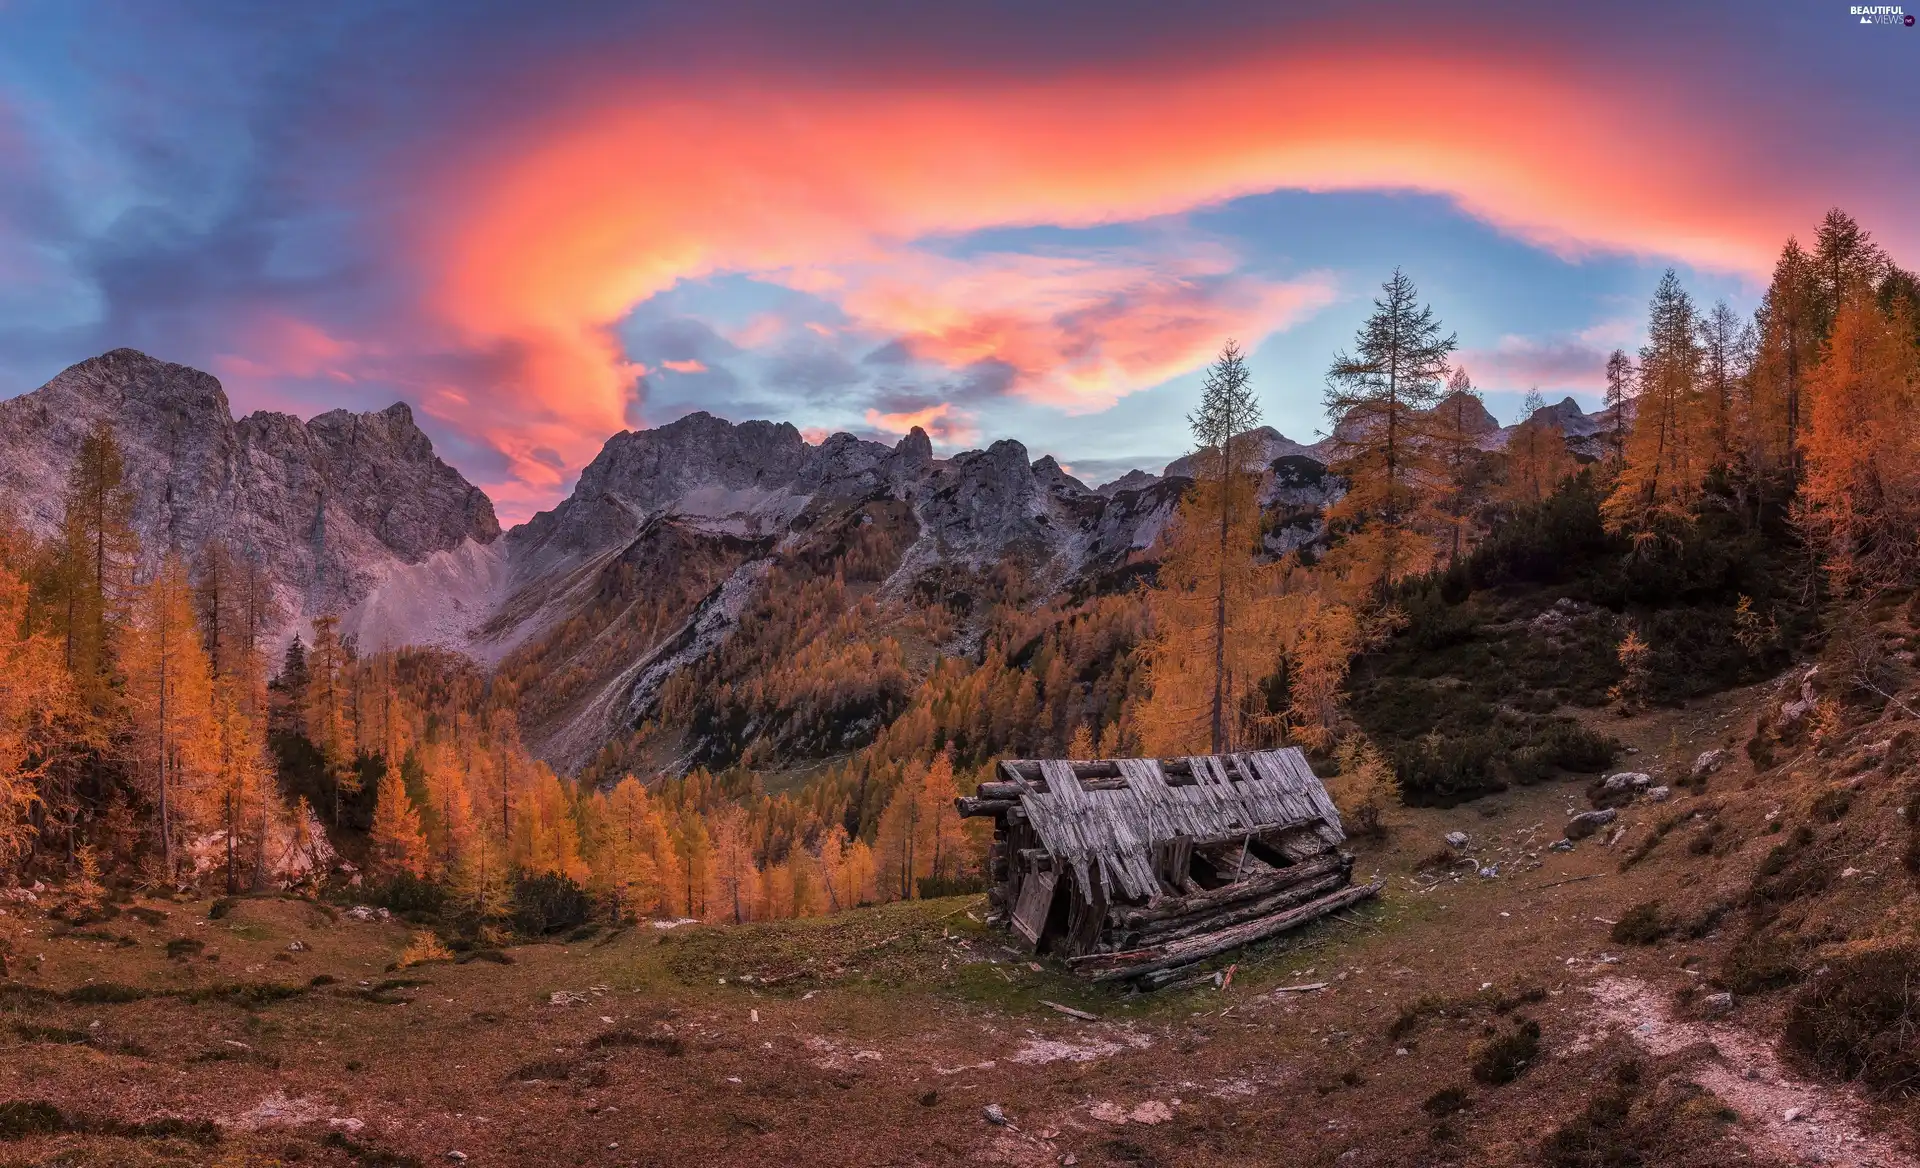 Mountains, autumn, Julian Alps, trees, cote, Great Sunsets, Wooden, destroyed, viewes